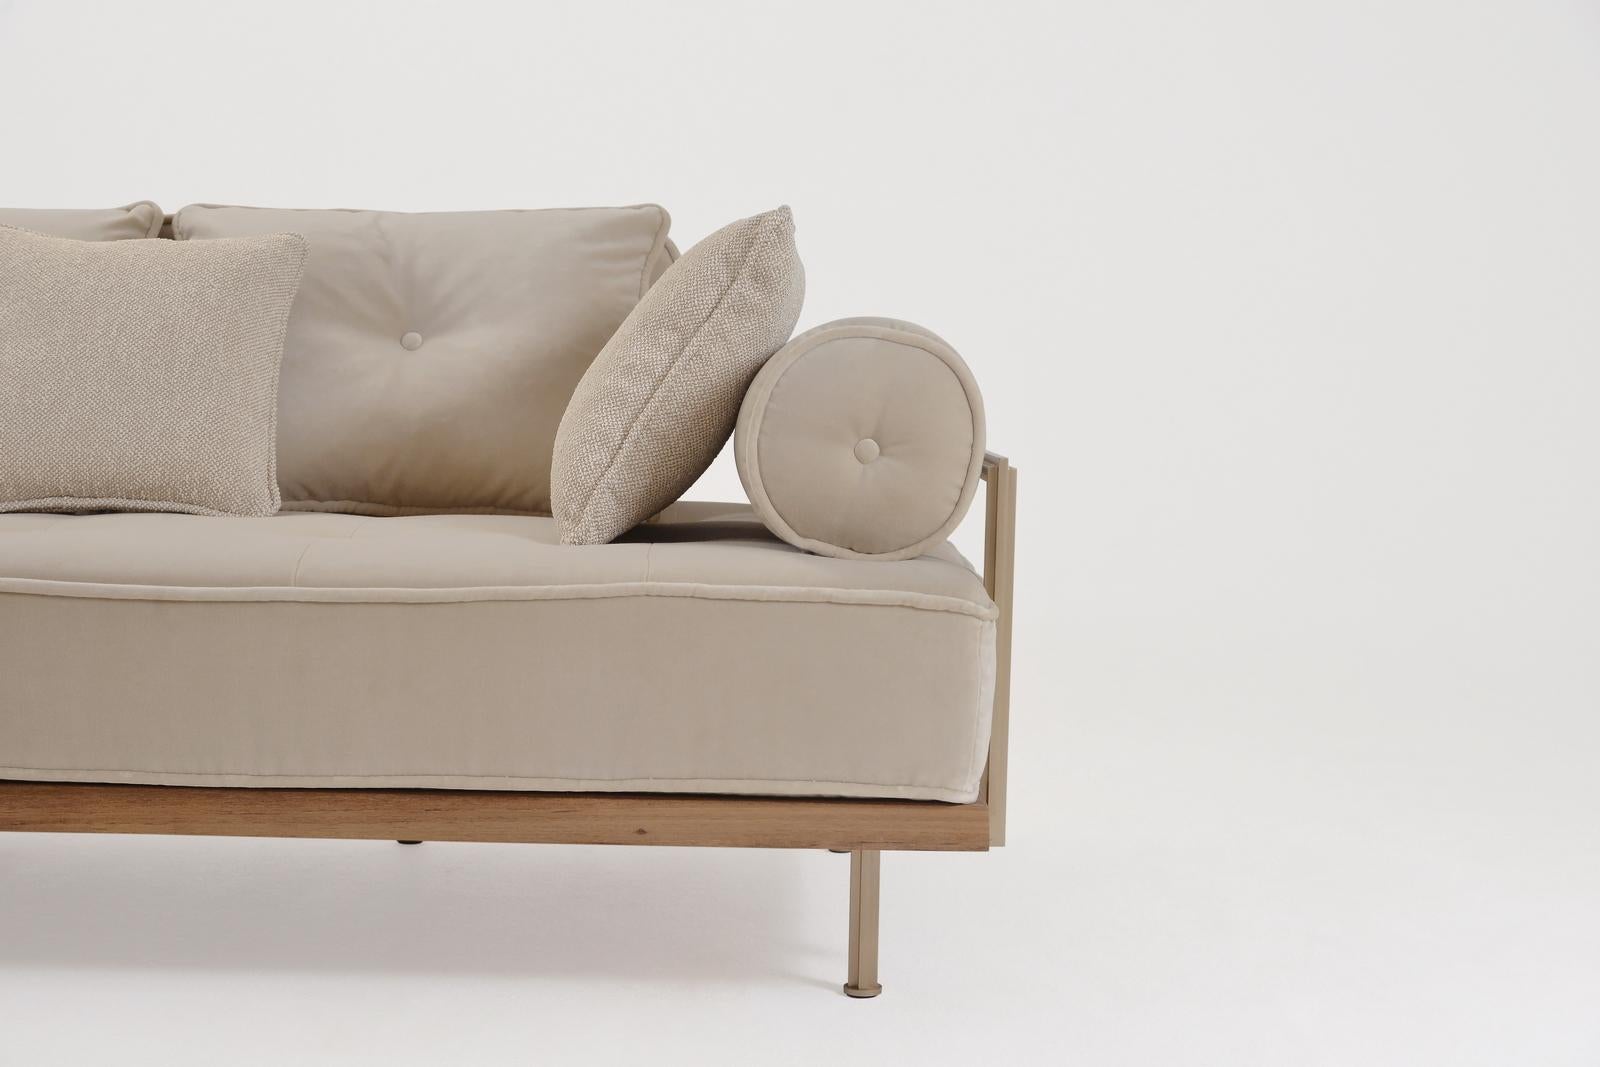 Bespoke 3 Seater Sofa Bleached Hardwood & Brass Frame by P. Tendercool (indoor) For Sale 1